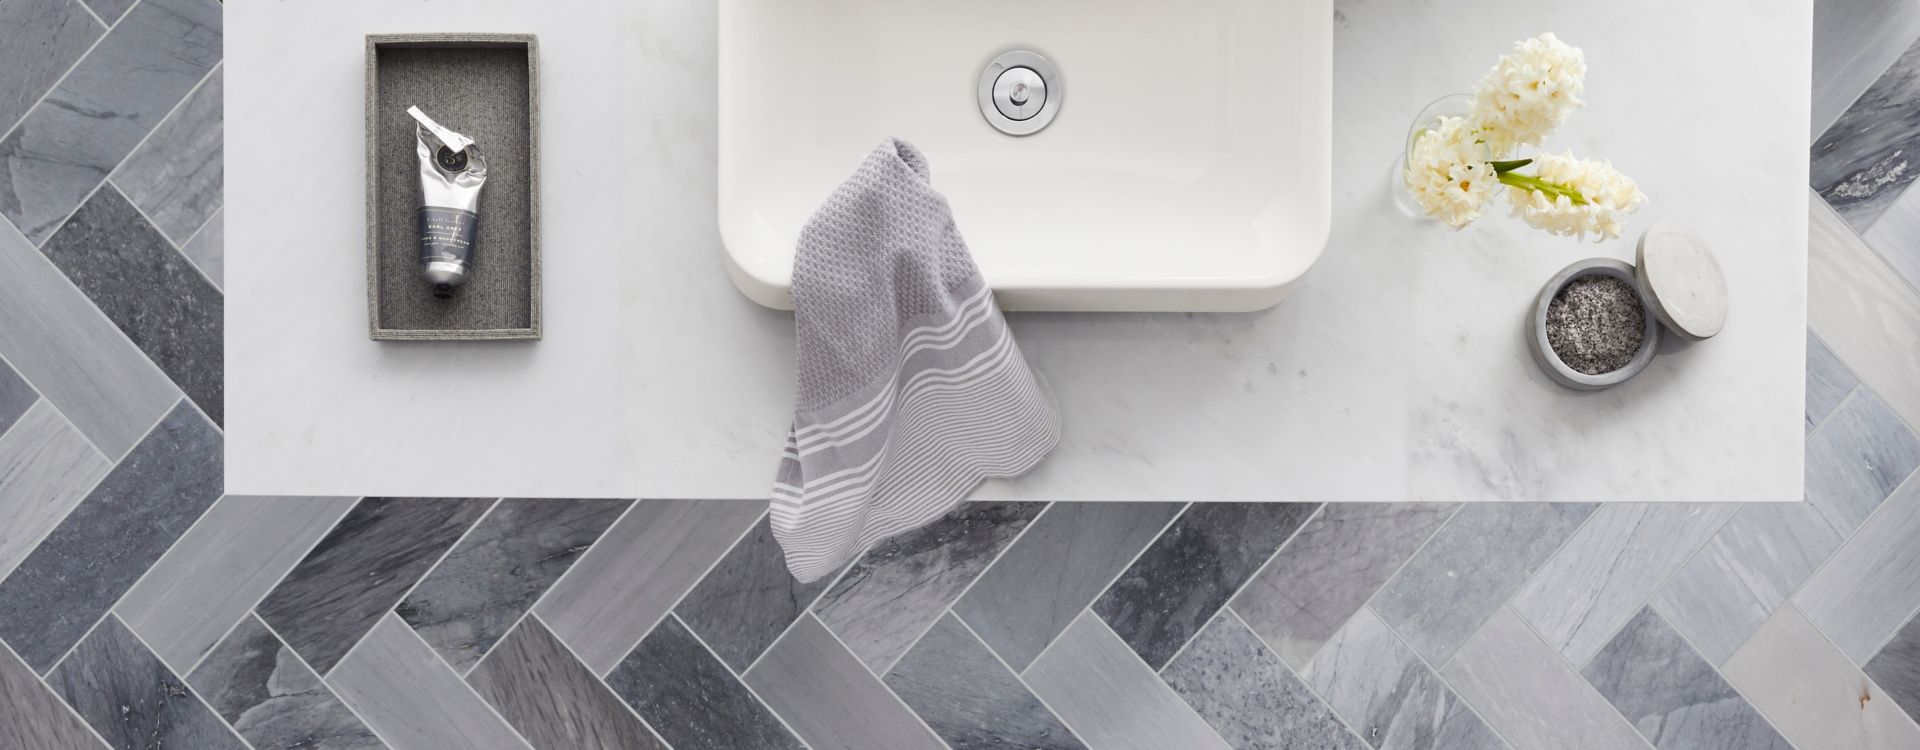 Overhead view of bathroom sink and floor featuring dramatic grey marble tile in a herringbone pattern.